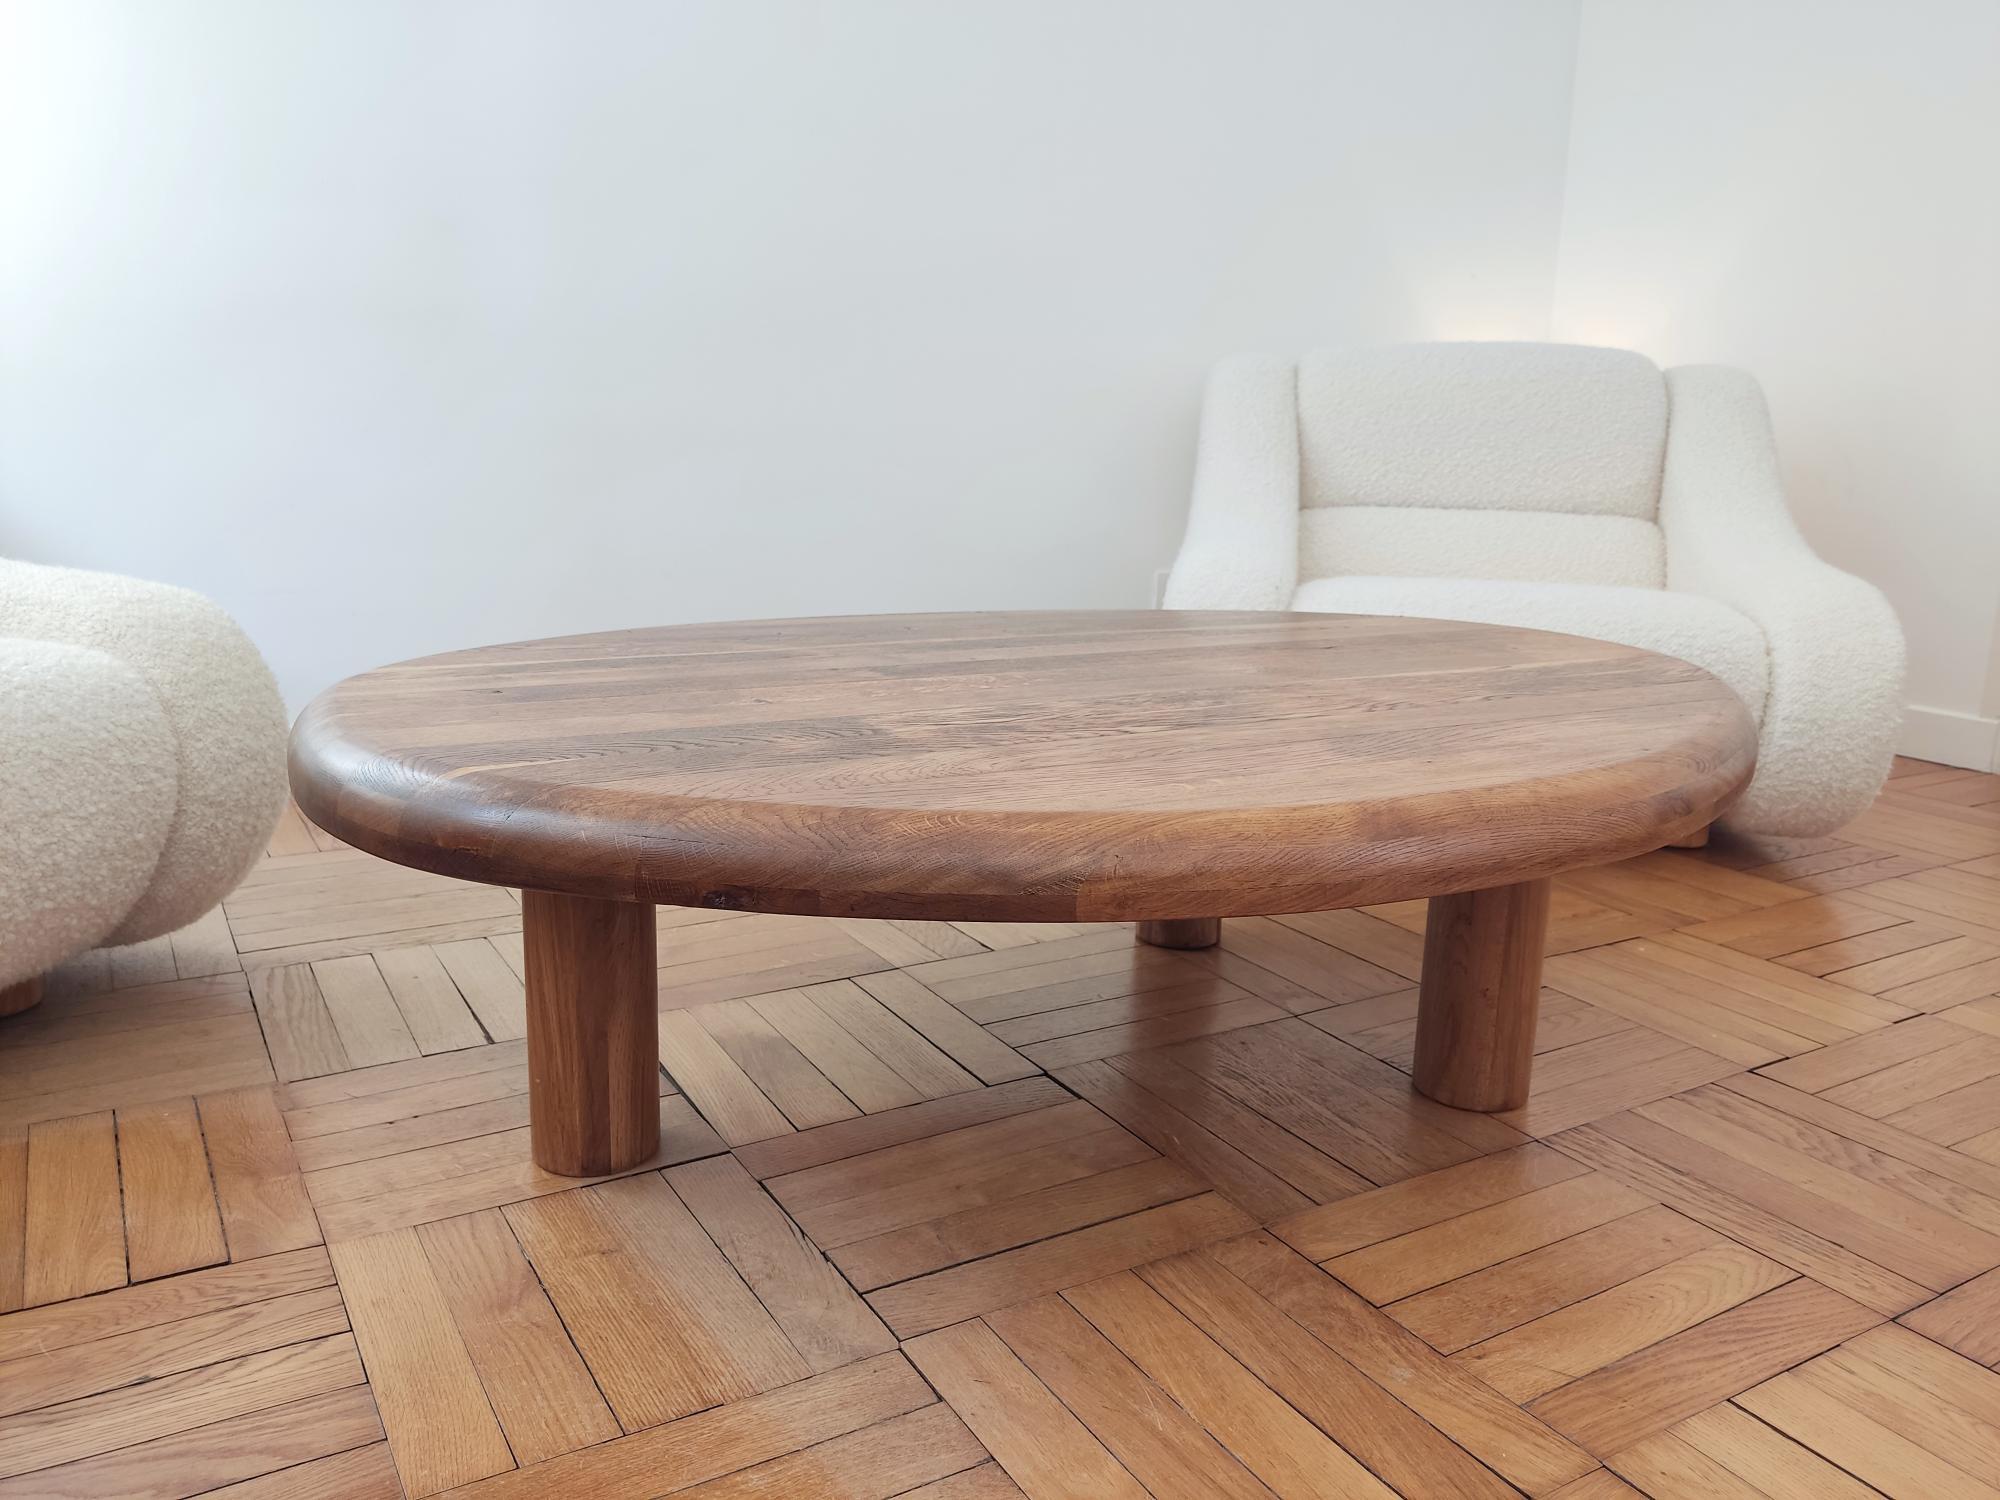 Vval solid wood coffee table 5